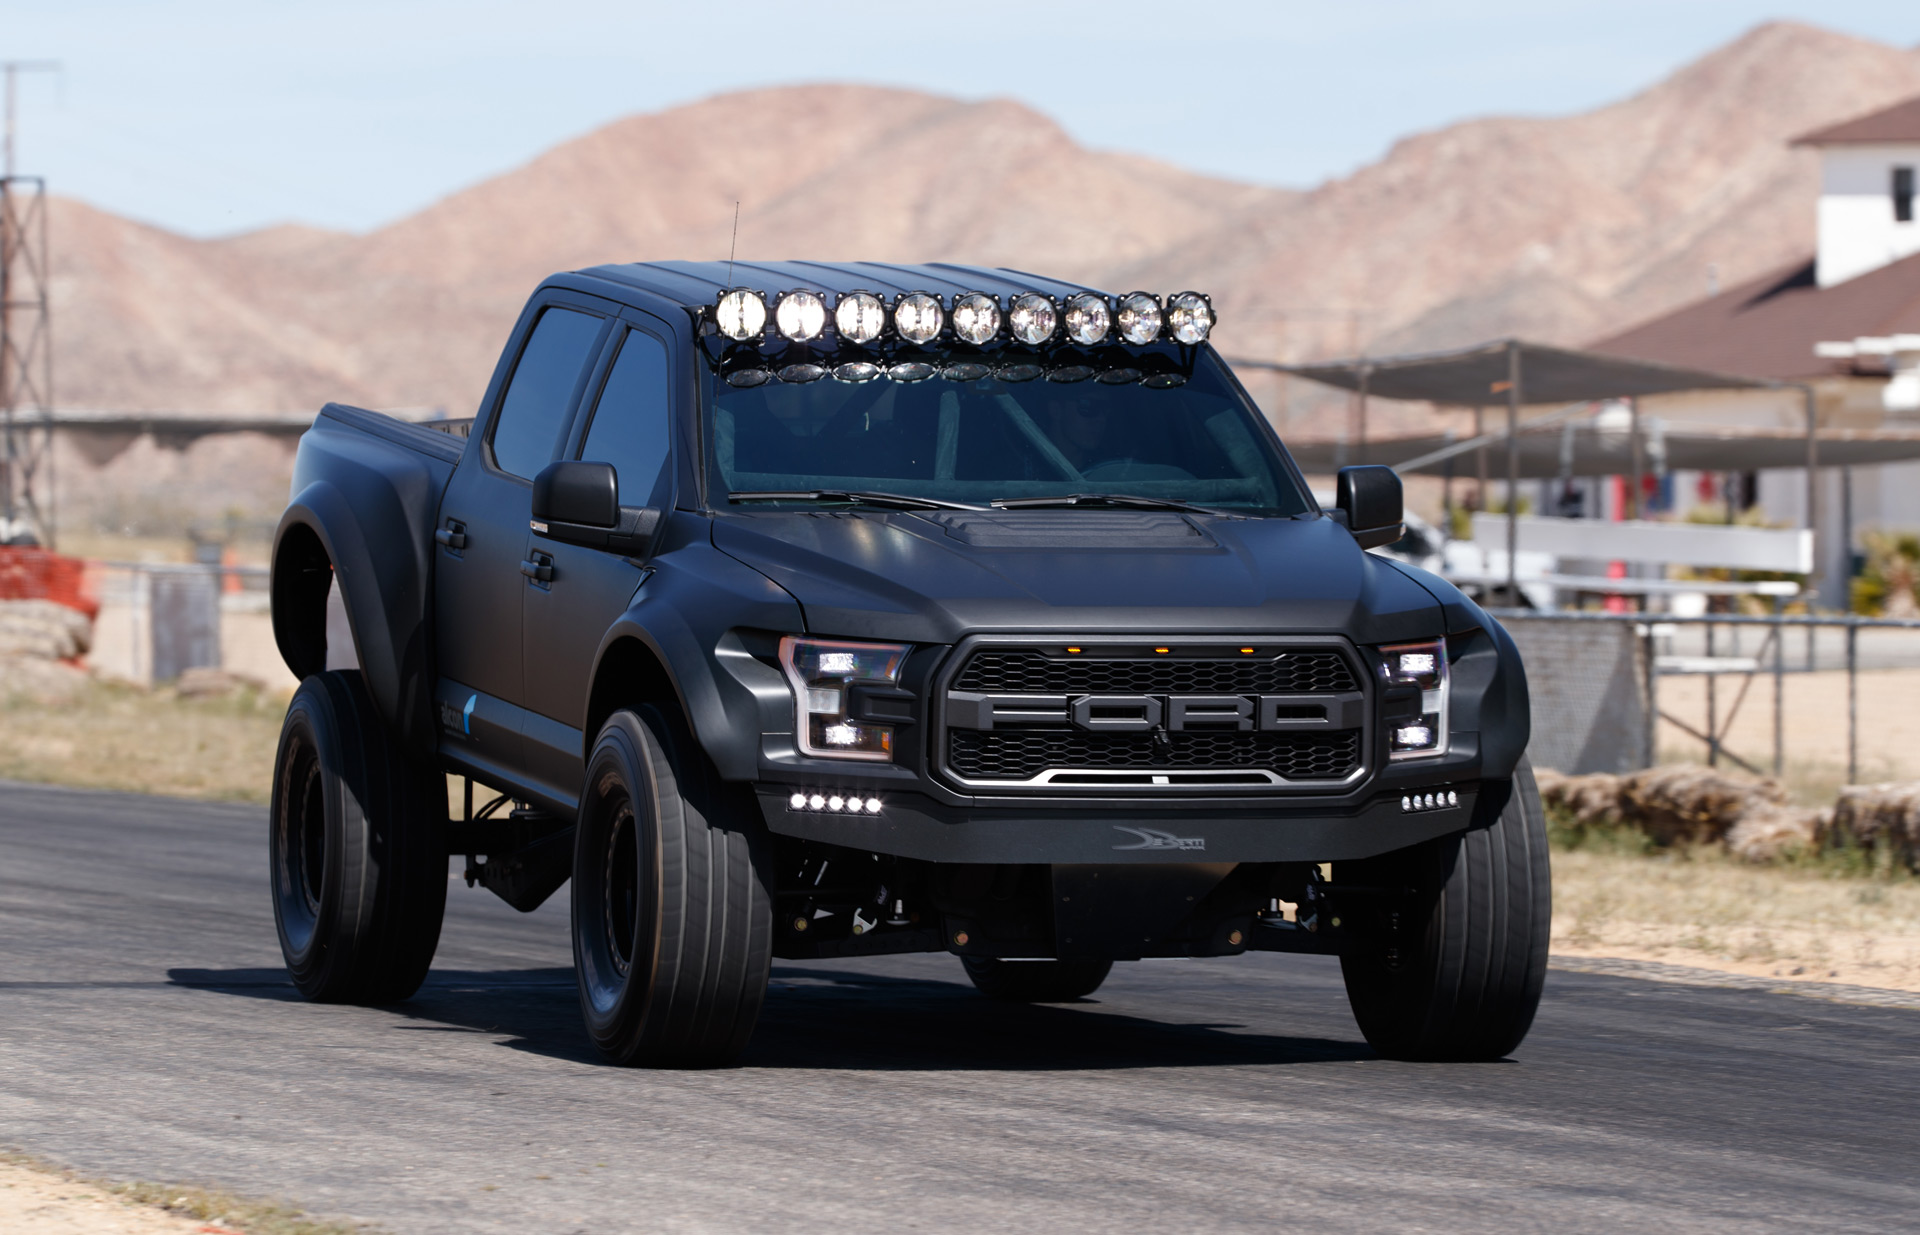 Alcon has a powerful brake upgrade for the Ford F-150 Raptor1920 x 1235